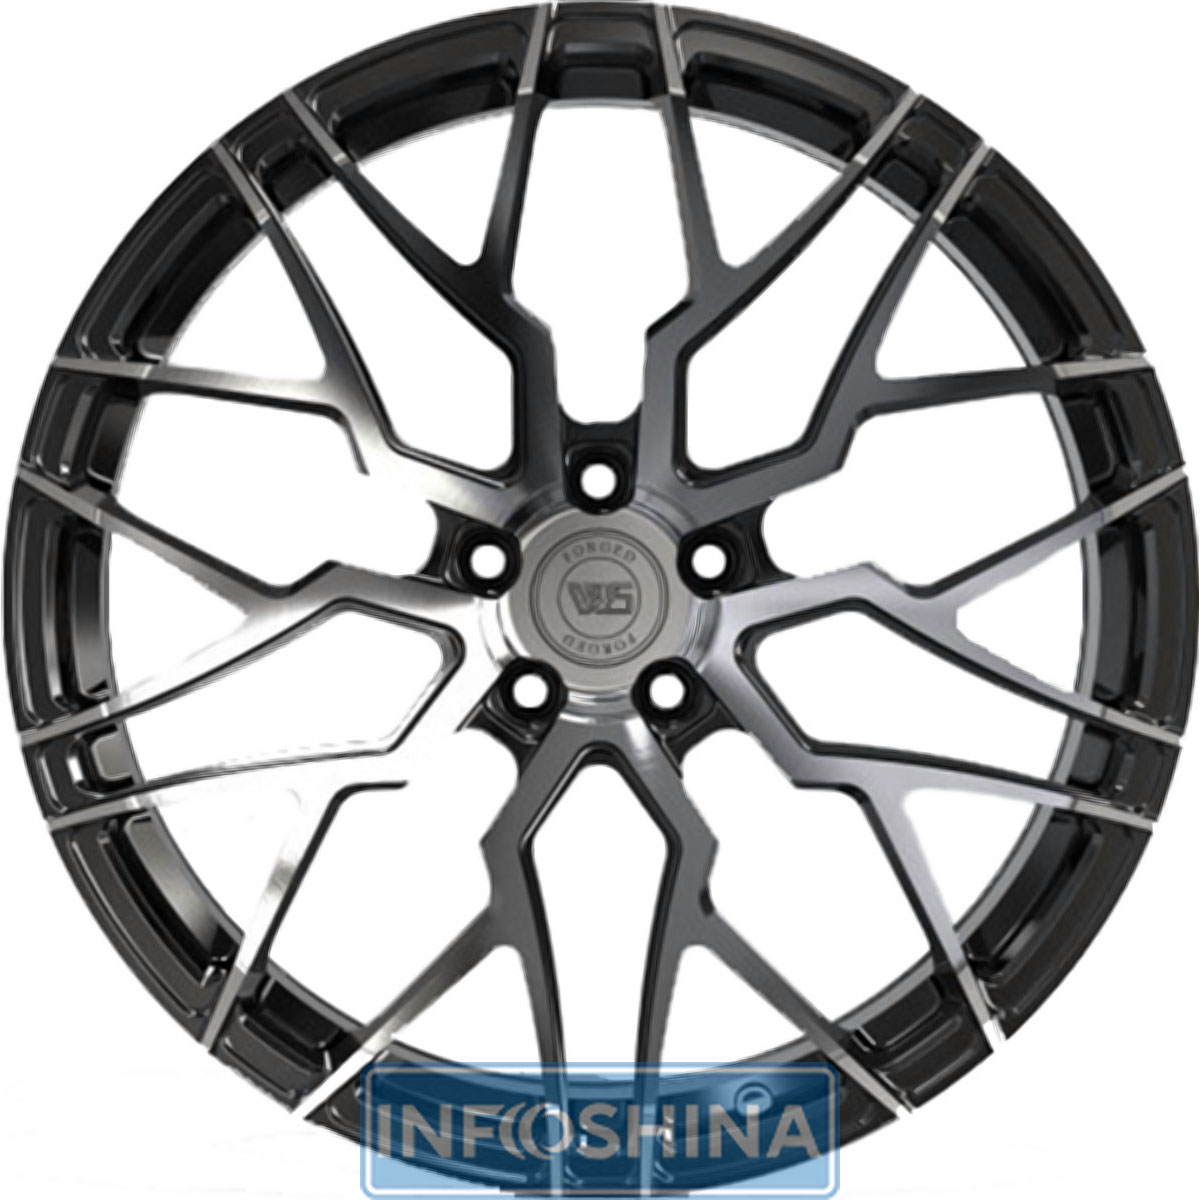 Купить диски WS Forged WS2270 Gloss Black With Machined Face R20 W9 PCD5x112 ET26 DIA66.5